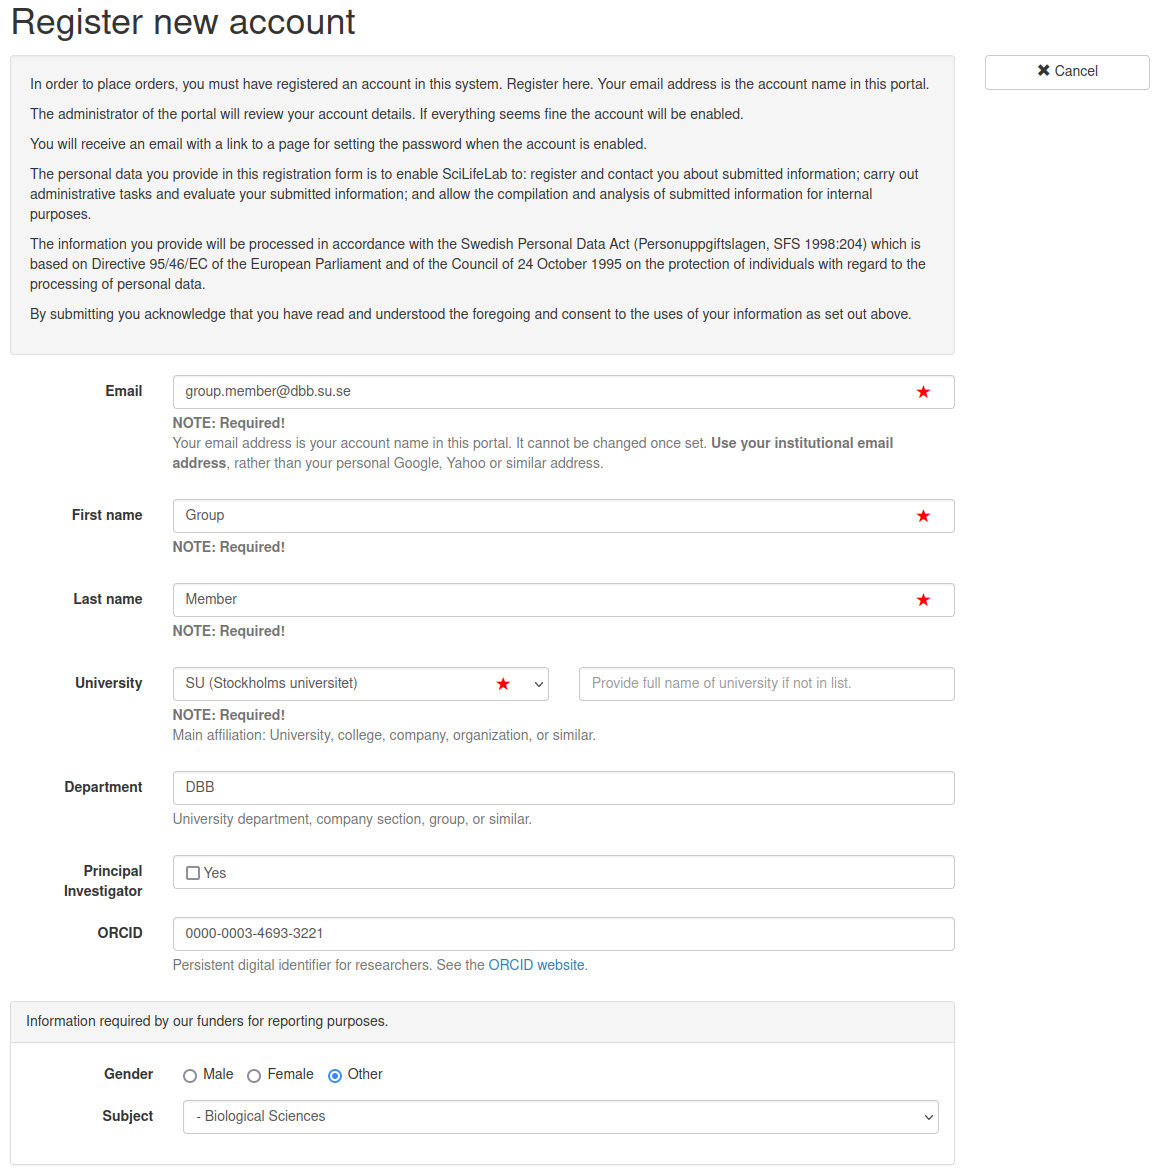 Fourth step in the Portal Guide for new users, showing a the first half of a properly filled out "Register new account" form for a new group member of the previously created Principal Investigator.